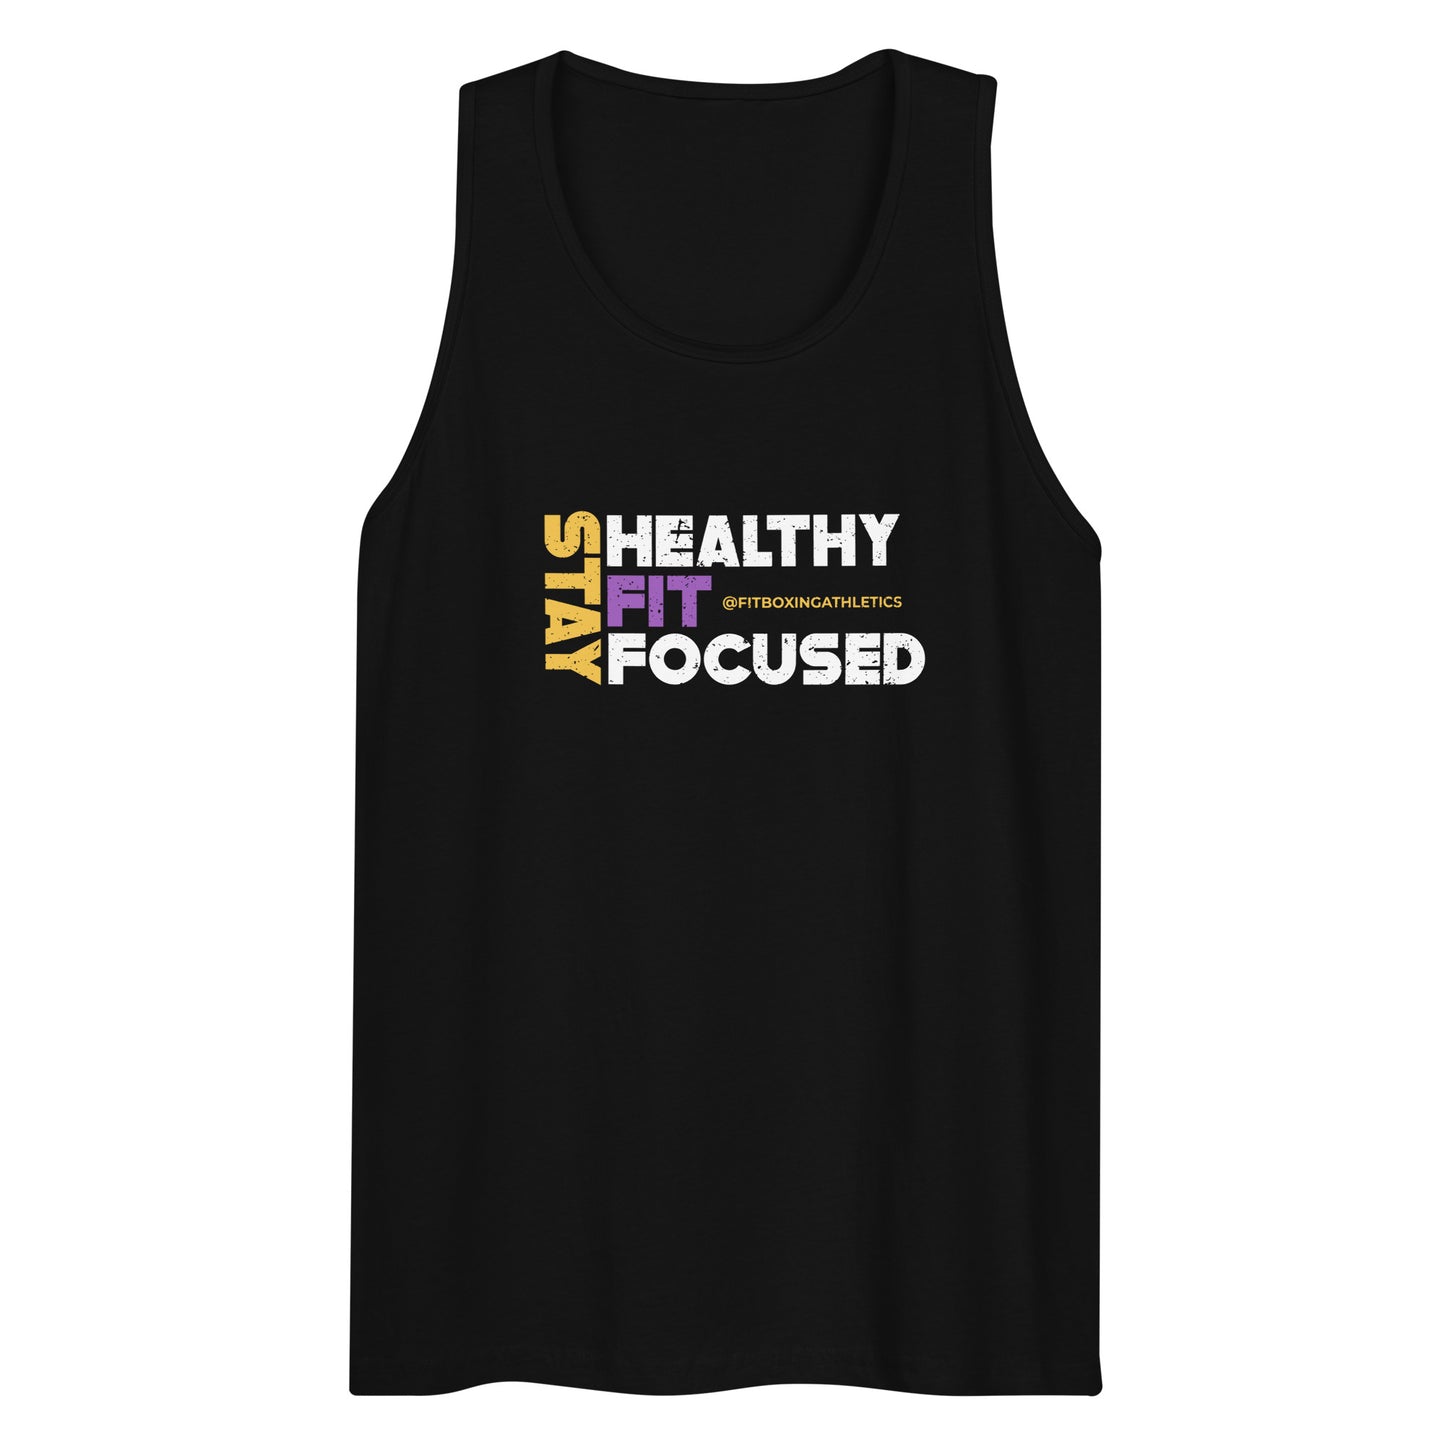 Stay Healthy Fit Focused Tank Top (White Logo)